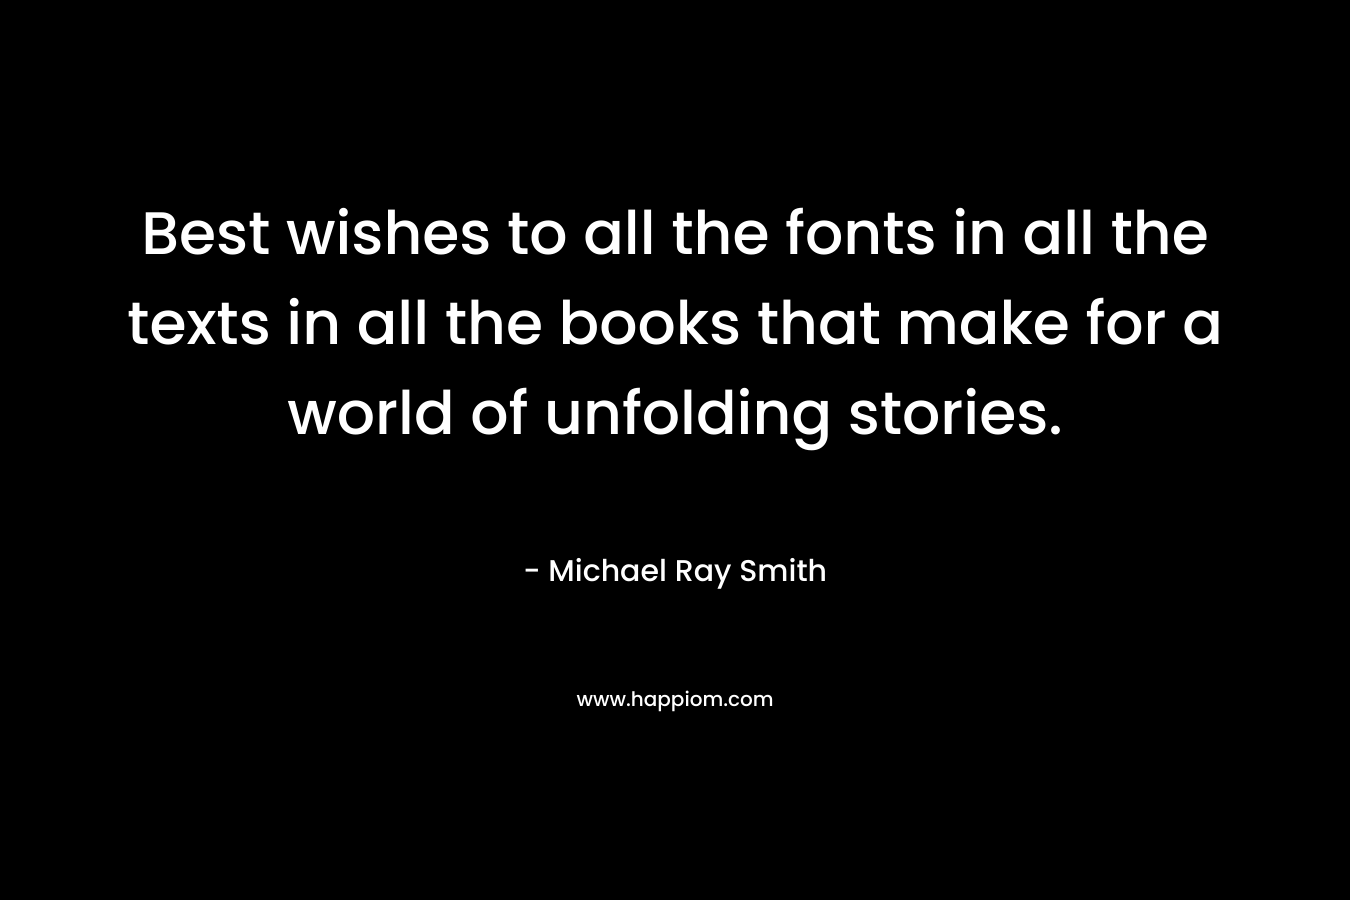 Best wishes to all the fonts in all the texts in all the books that make for a world of unfolding stories. – Michael Ray Smith